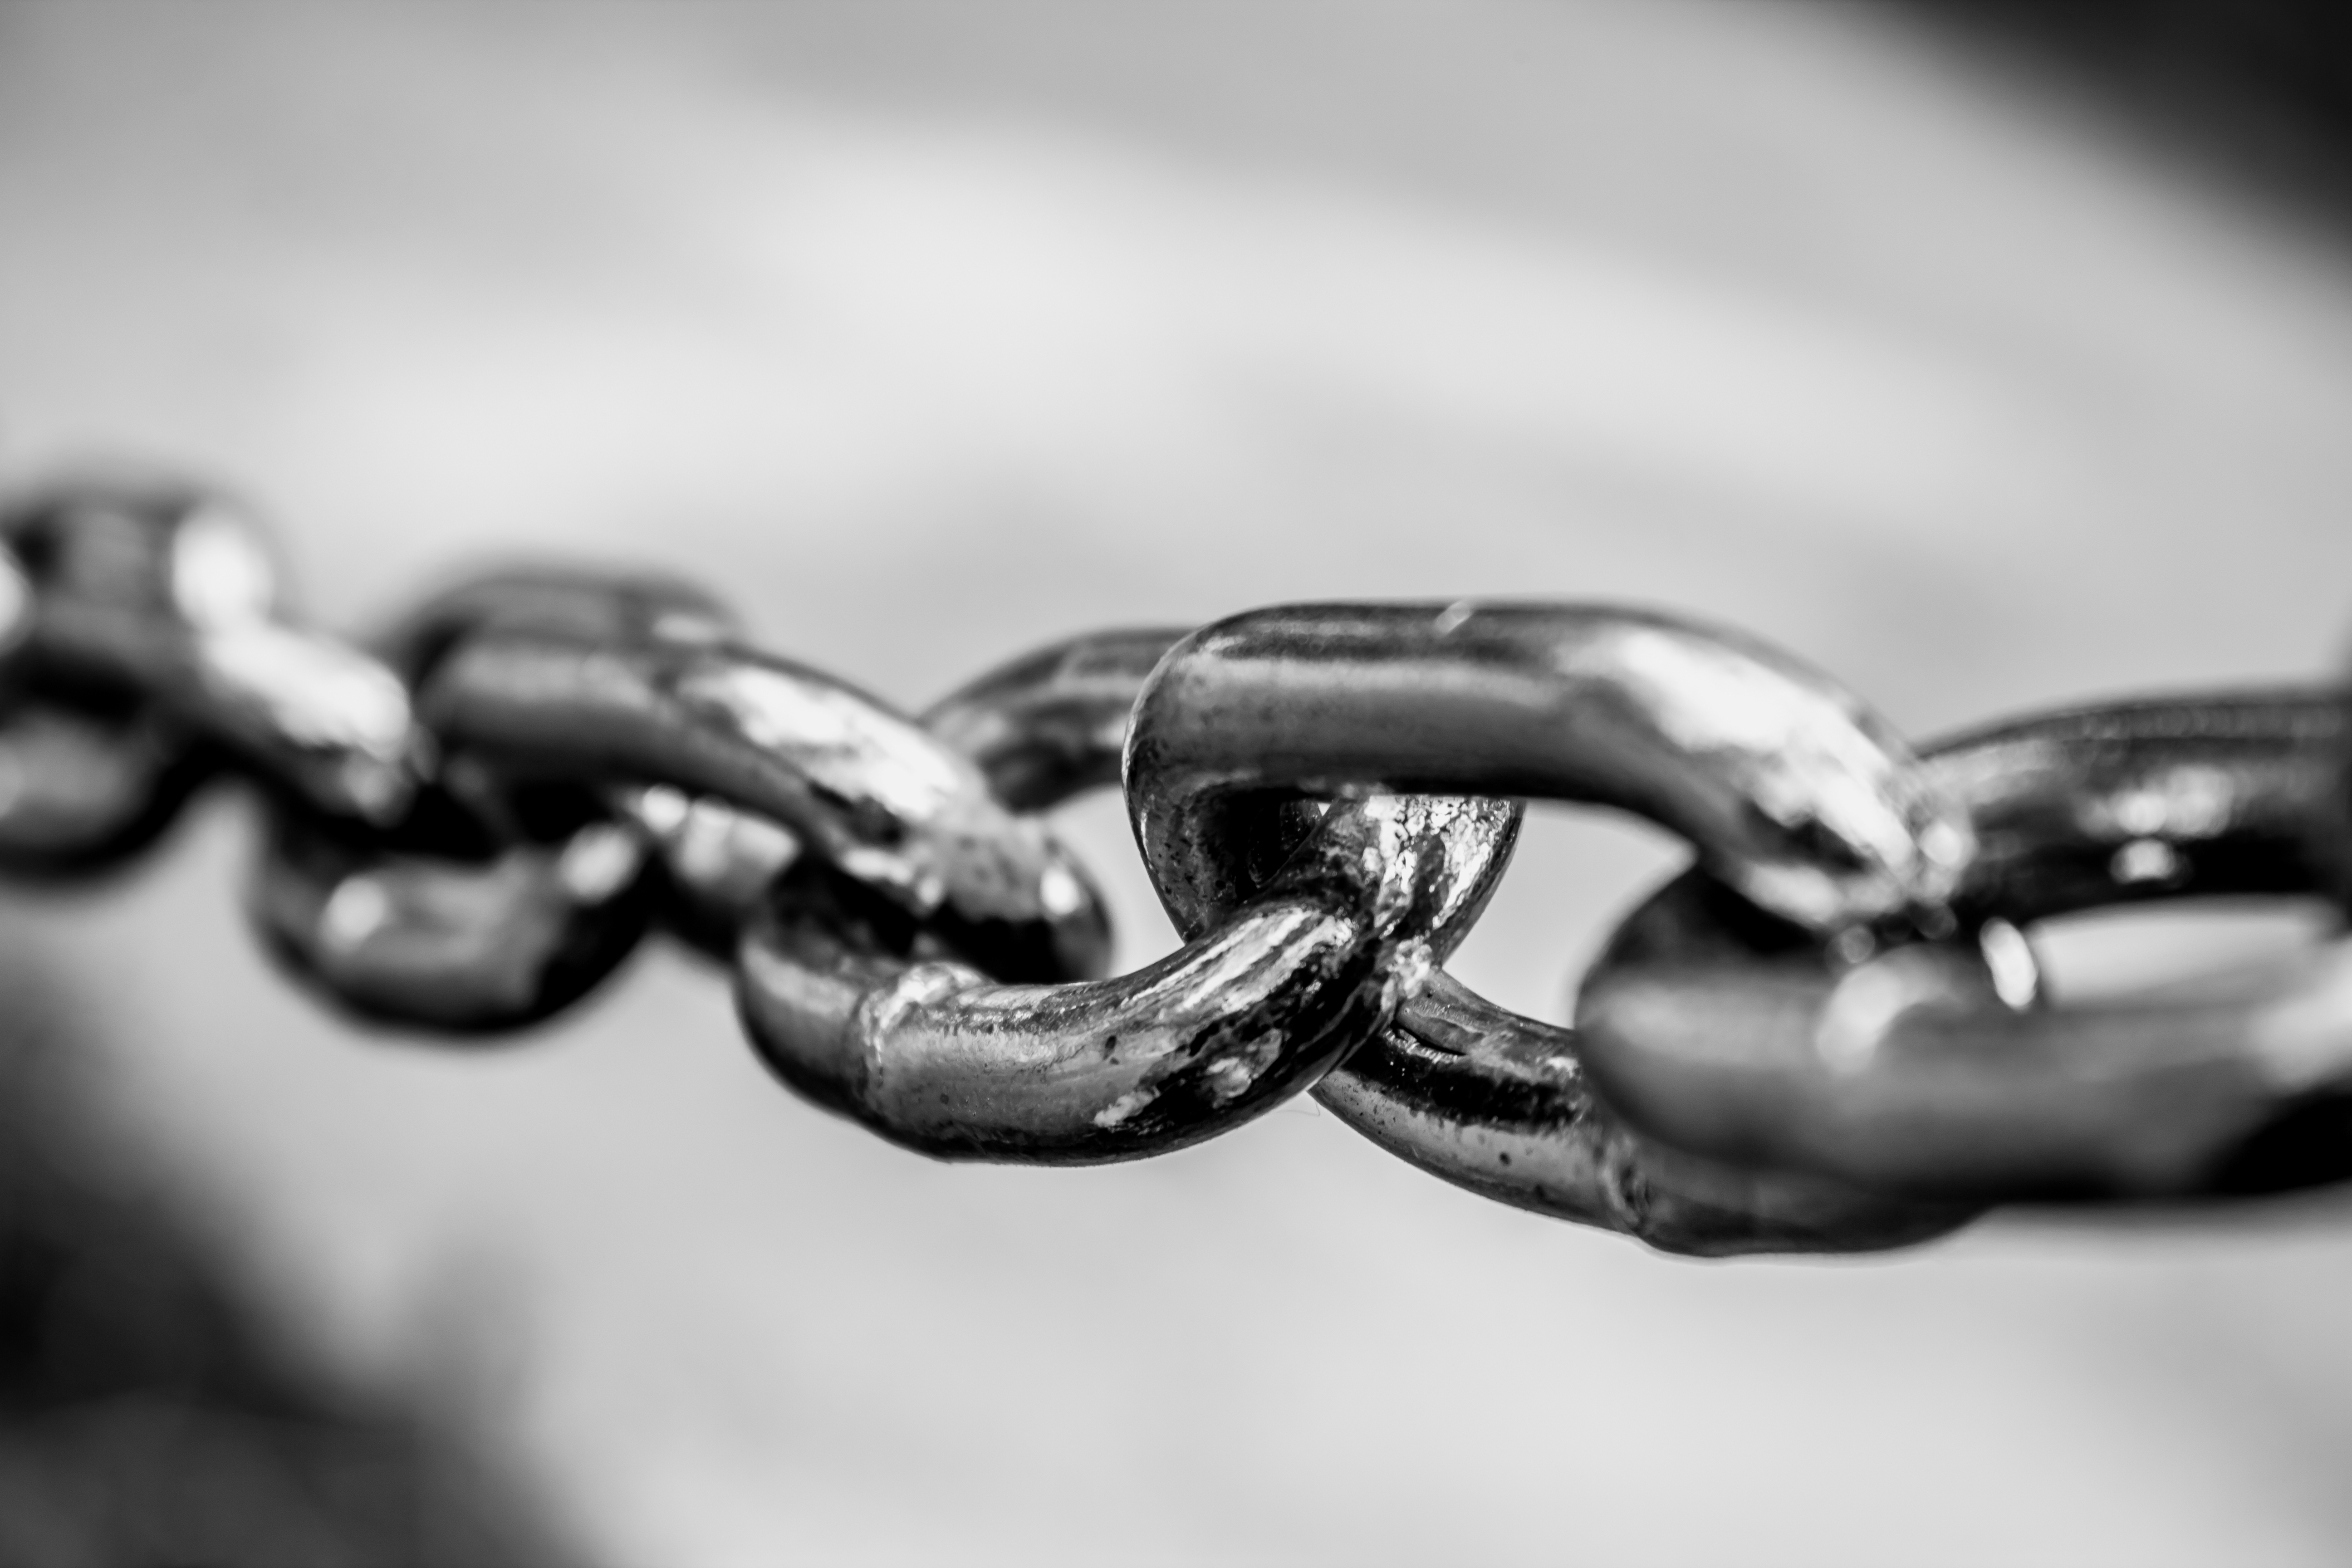 Choosing the right chain for the job - brass chains vs steel chains